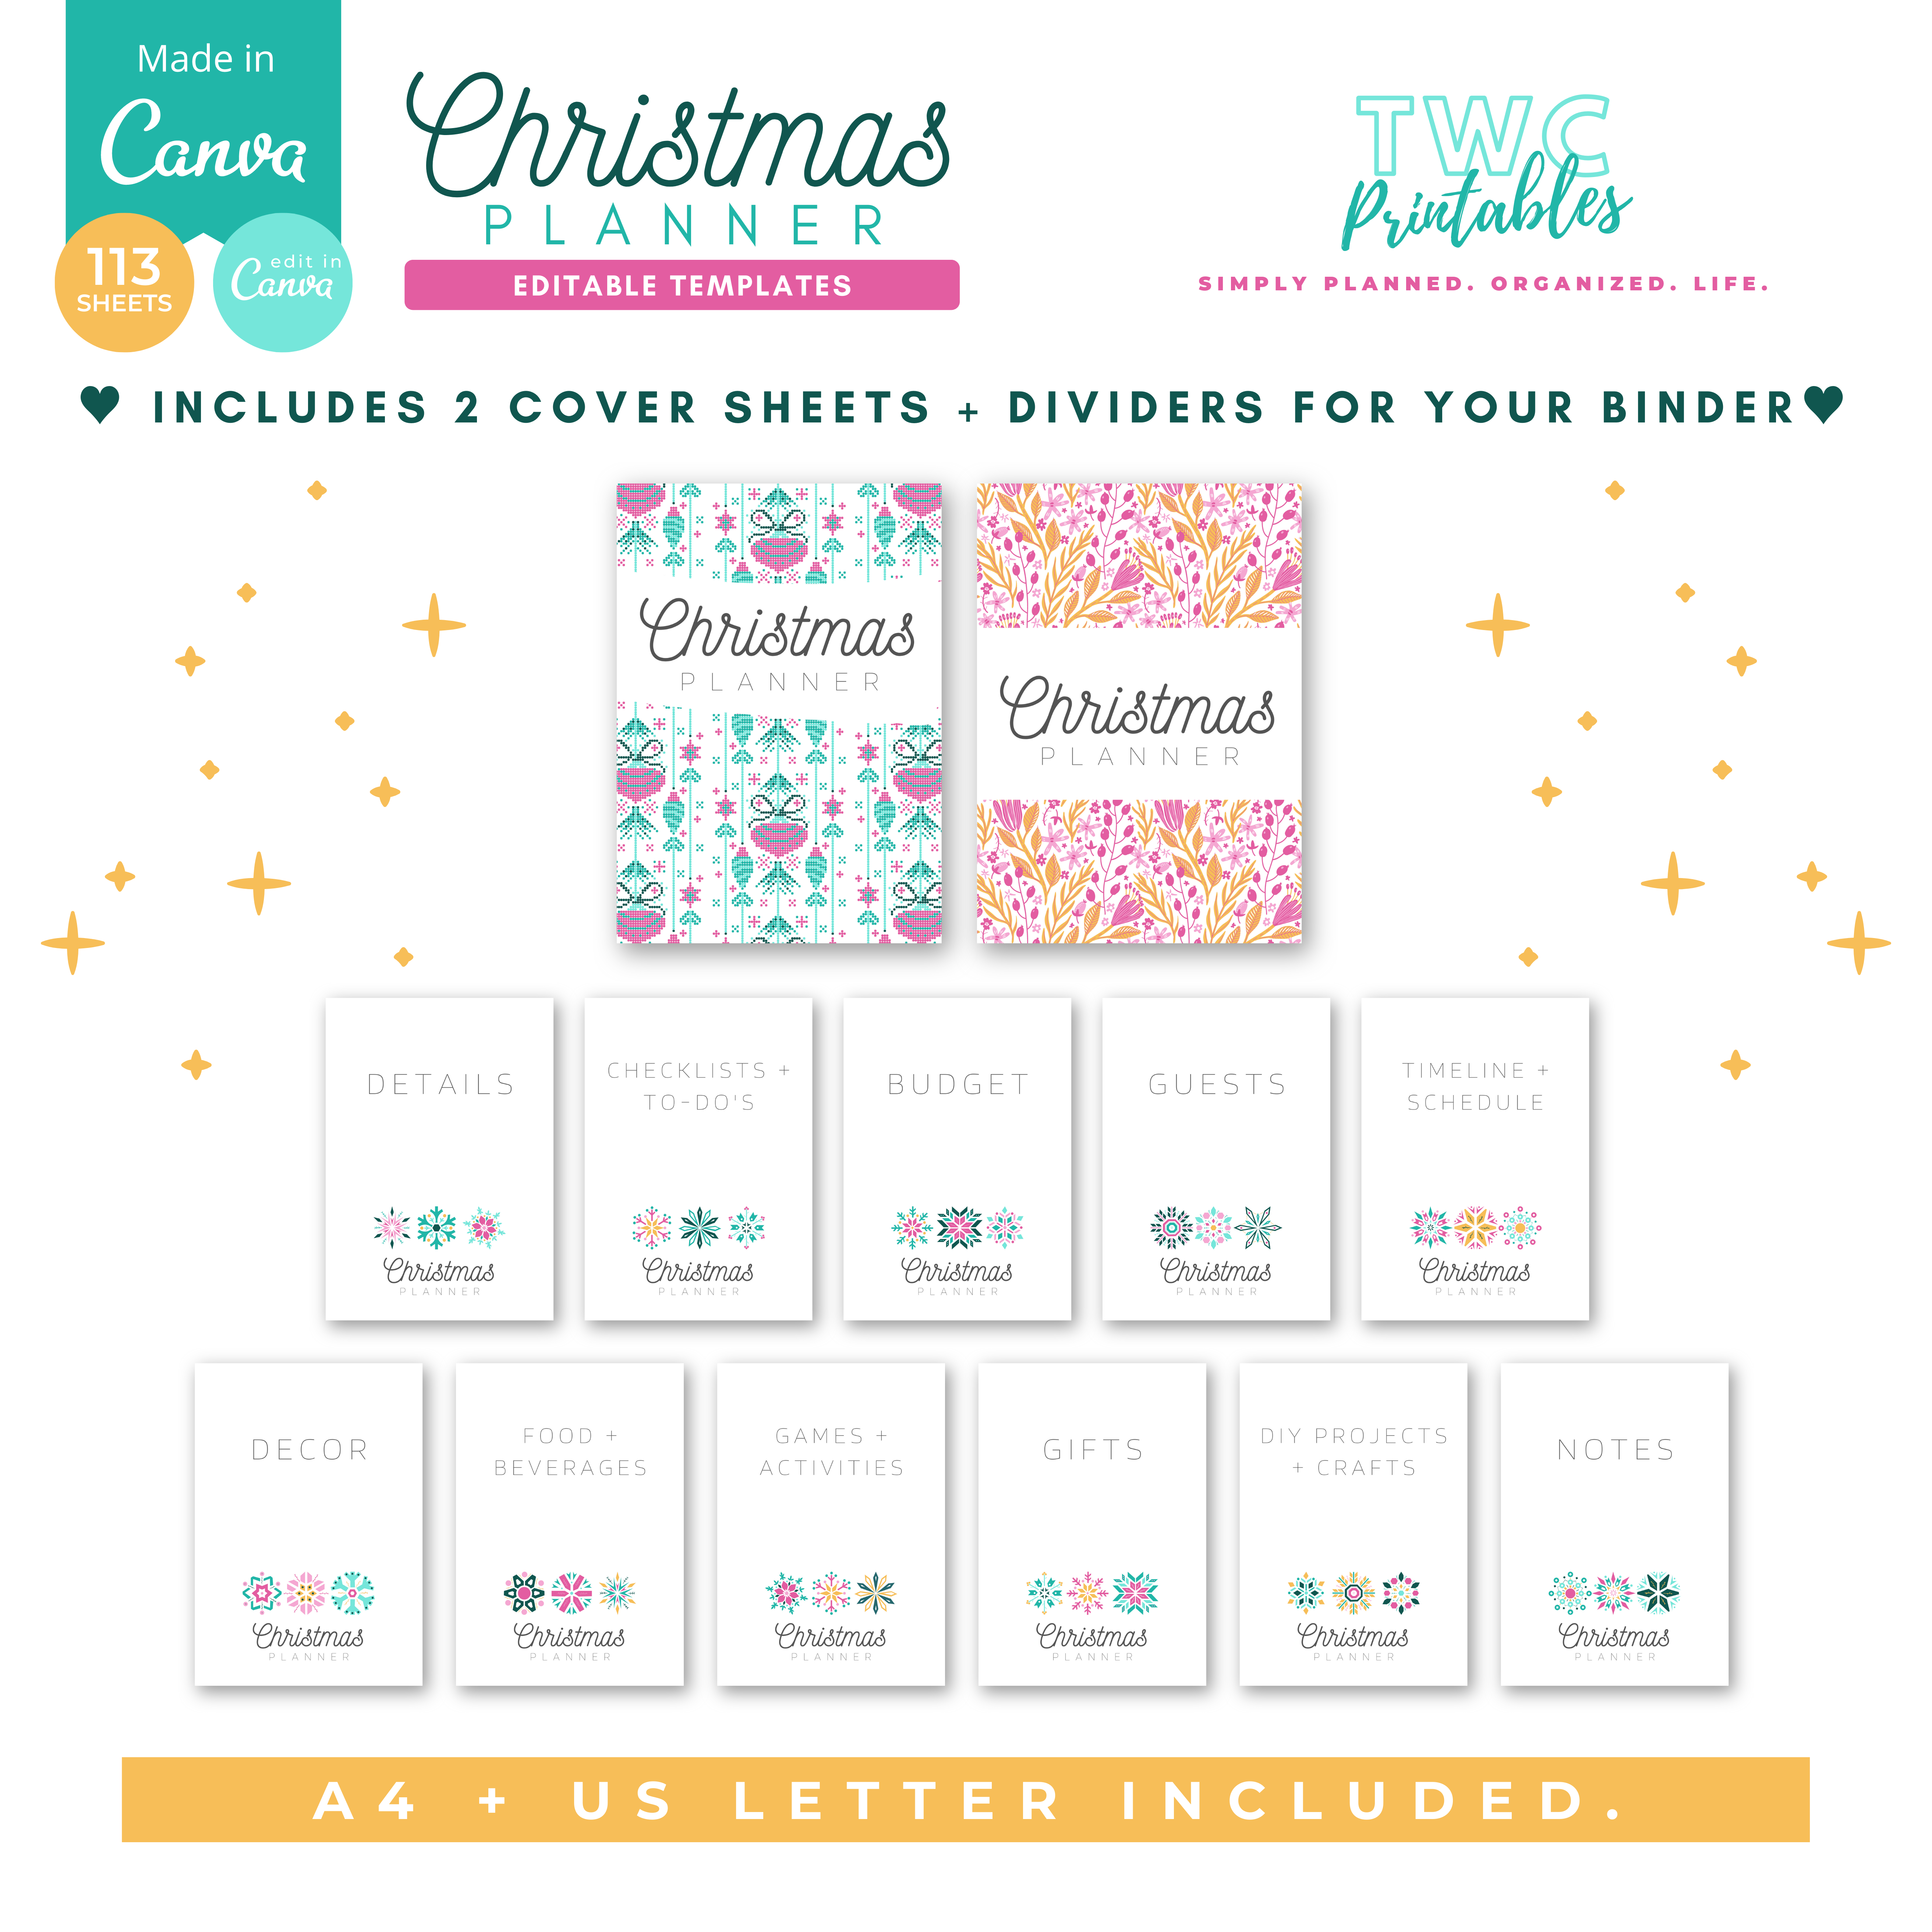 This ultimate Christmas Planner is an editable Canva Template that you can change to suit your needs! Create your very own holiday planner by simply editing this template with the free version of Canva - you can change the entire design, including fonts, colors, elements, and much more! A free Canva guide for beginners is included in your purchase of this listing. The Christmas Planner template can be used for 2021 and beyond (the calendars are undated).